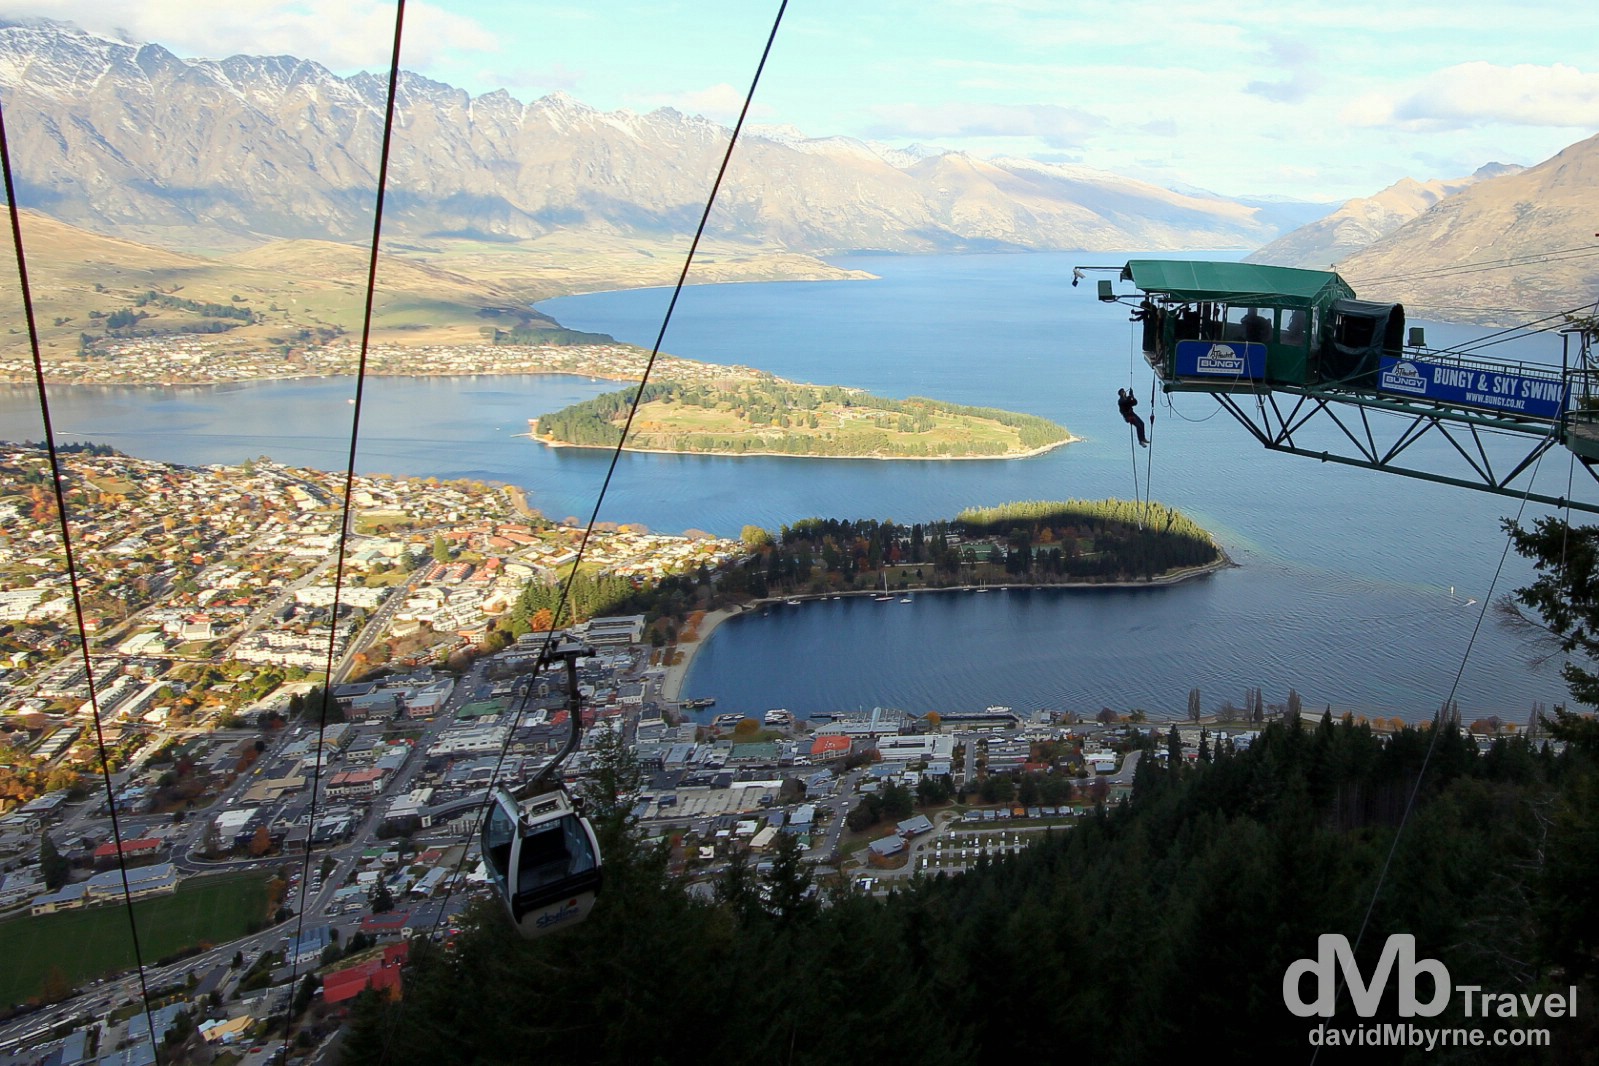 The Ledge Bungy as seen from The Skyline overlooking Queenstown, South Island, New Zealand. May 23rd 2012.